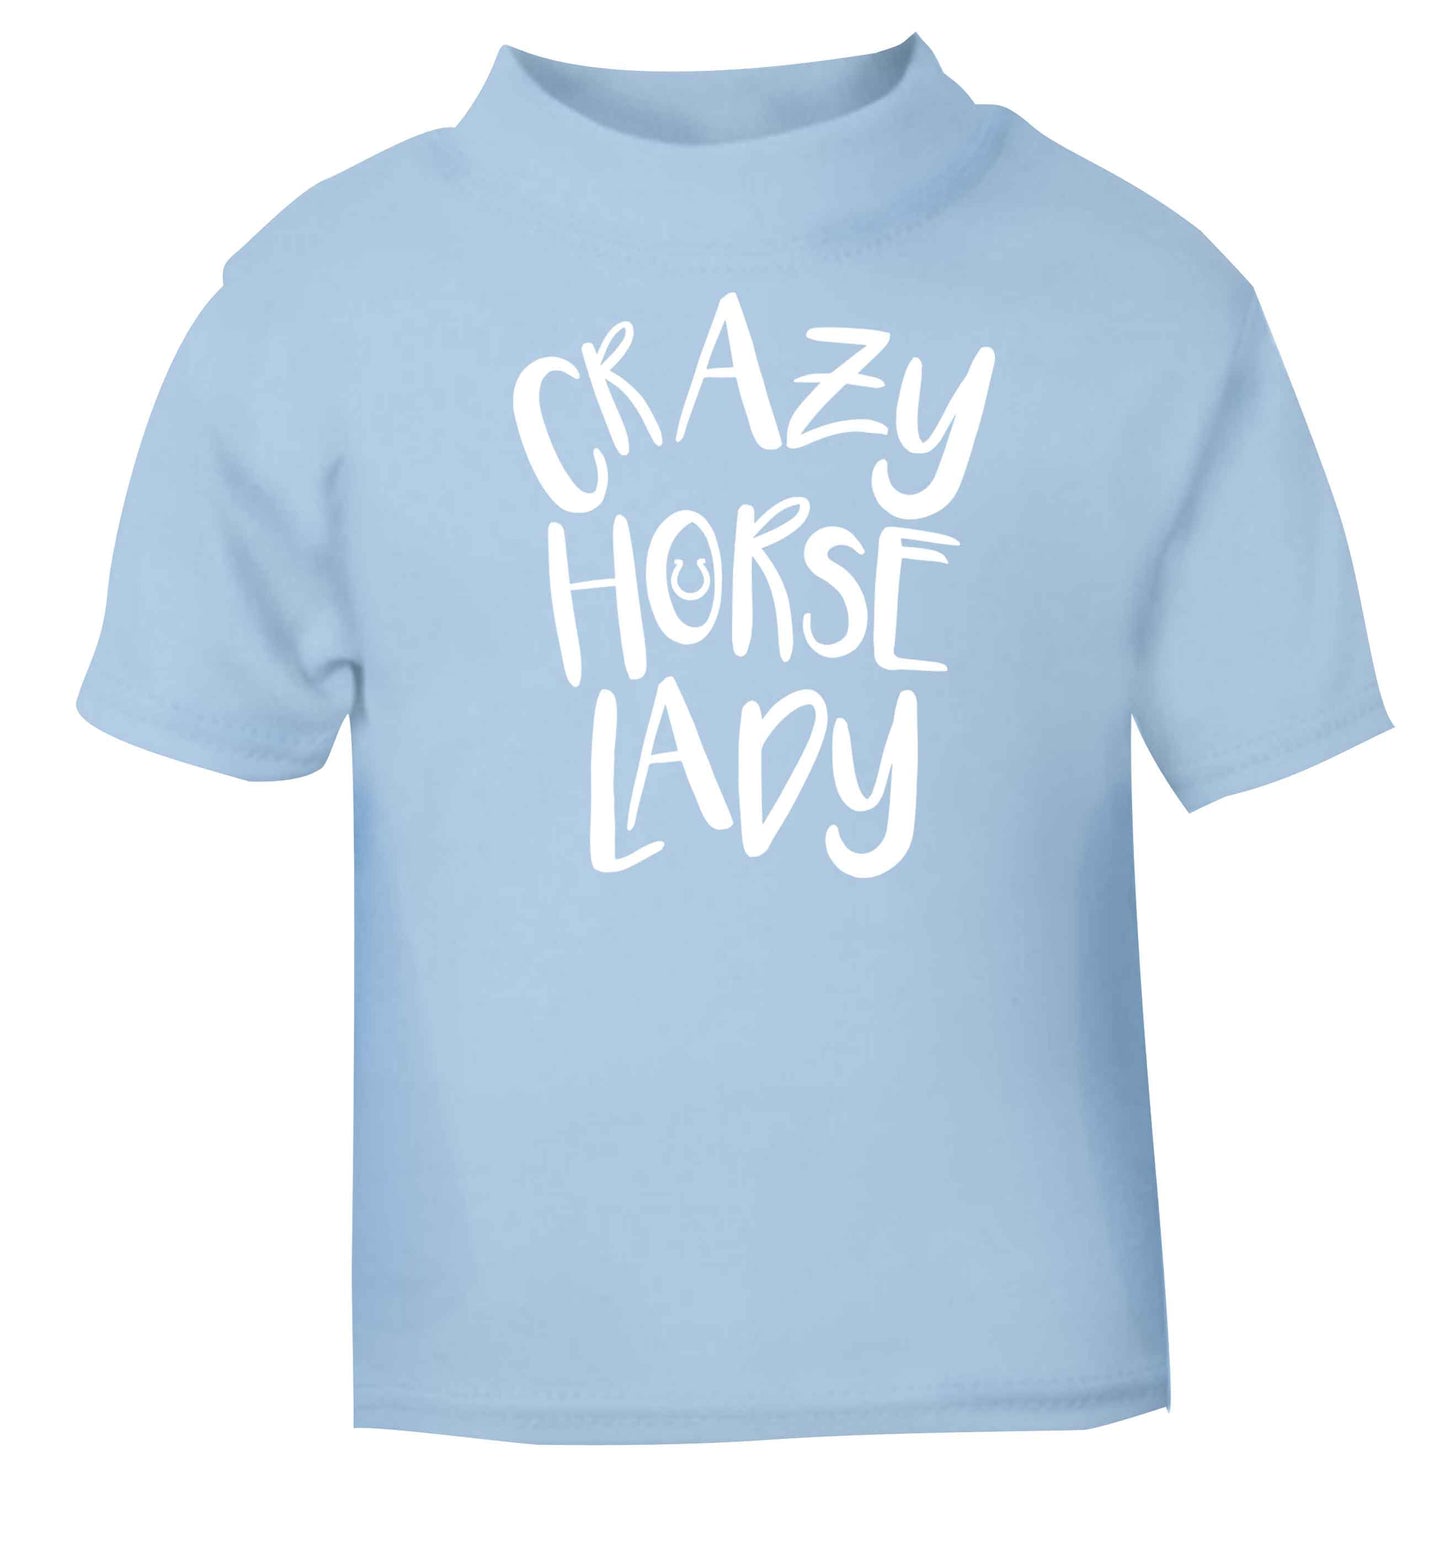 Crazy horse lady light blue baby toddler Tshirt 2 Years